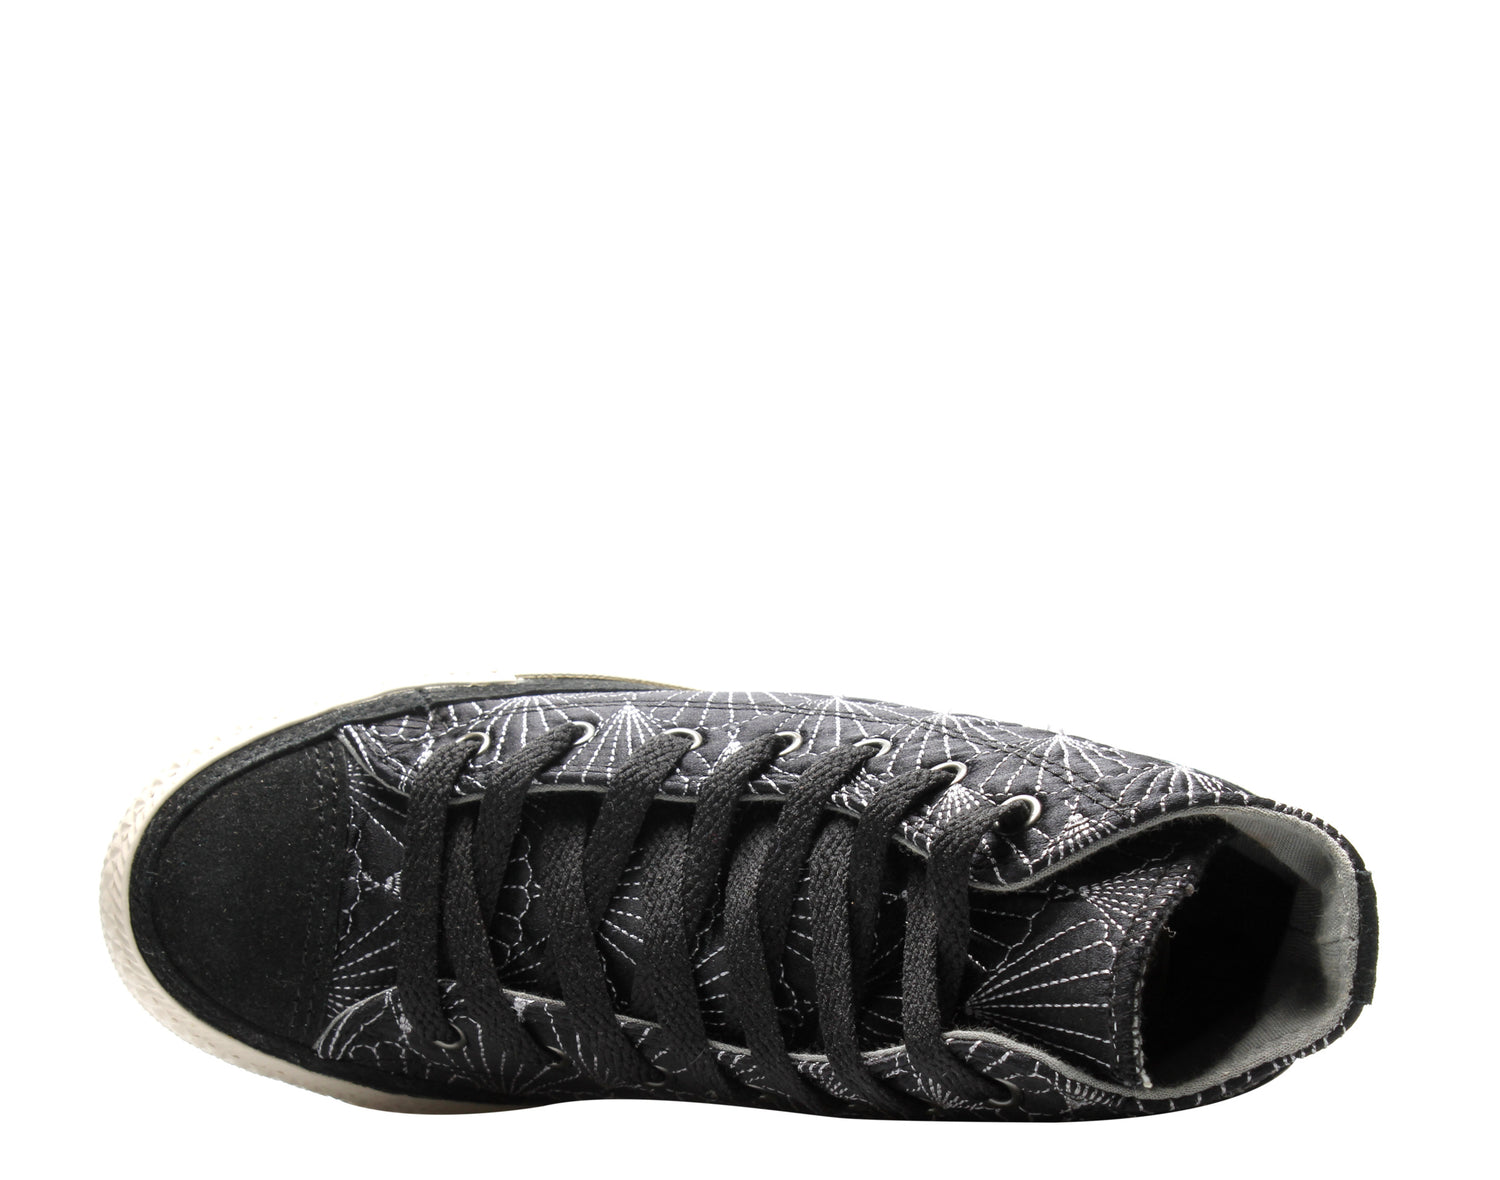 Converse Chuck Taylor Quilted Hi Sneakers